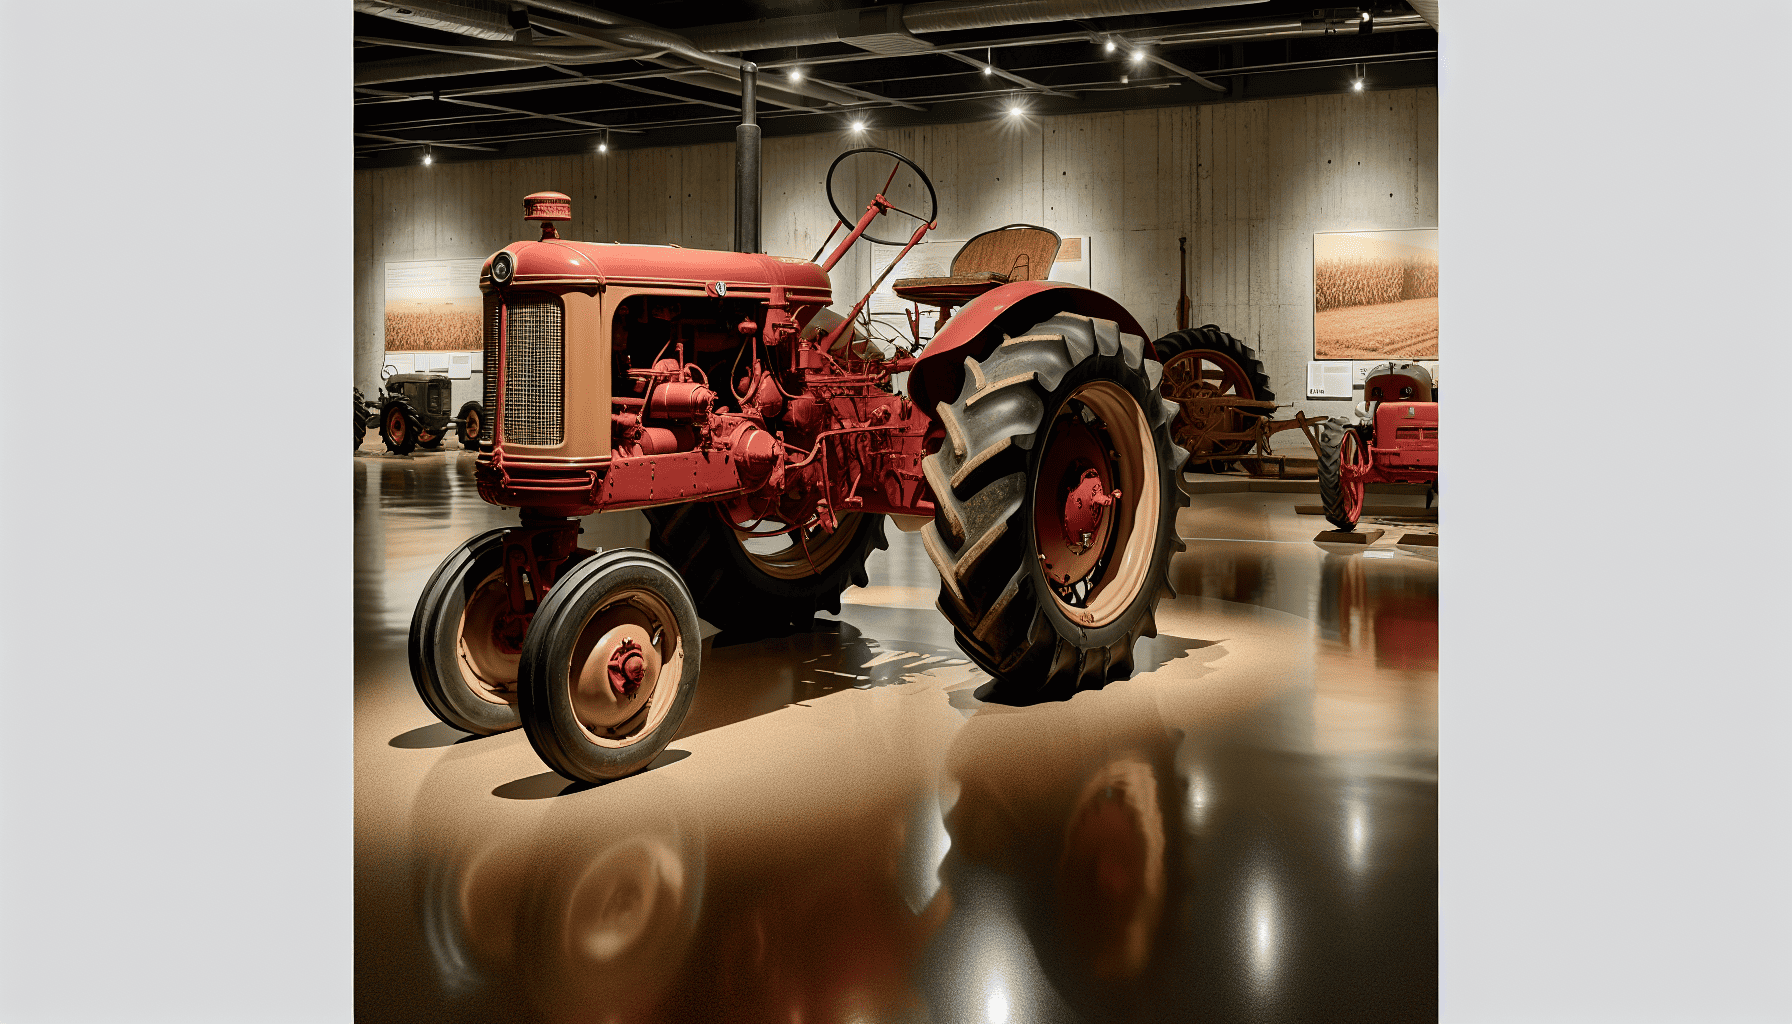 A vintage tractor displayed in a museum